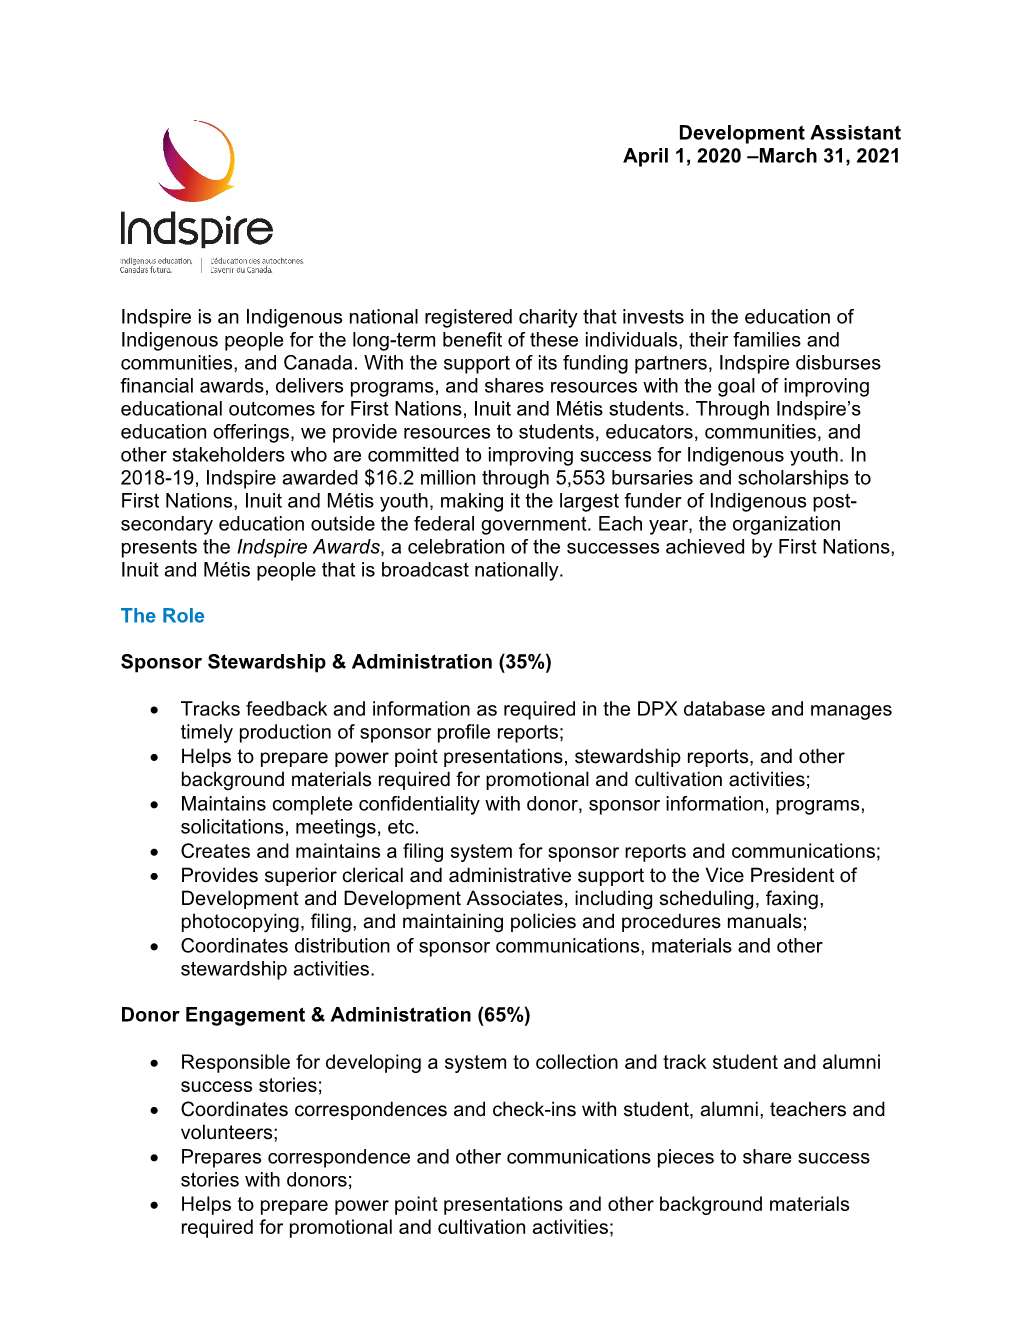 Development Assistant April 1, 2020 –March 31, 2021 Indspire Is An